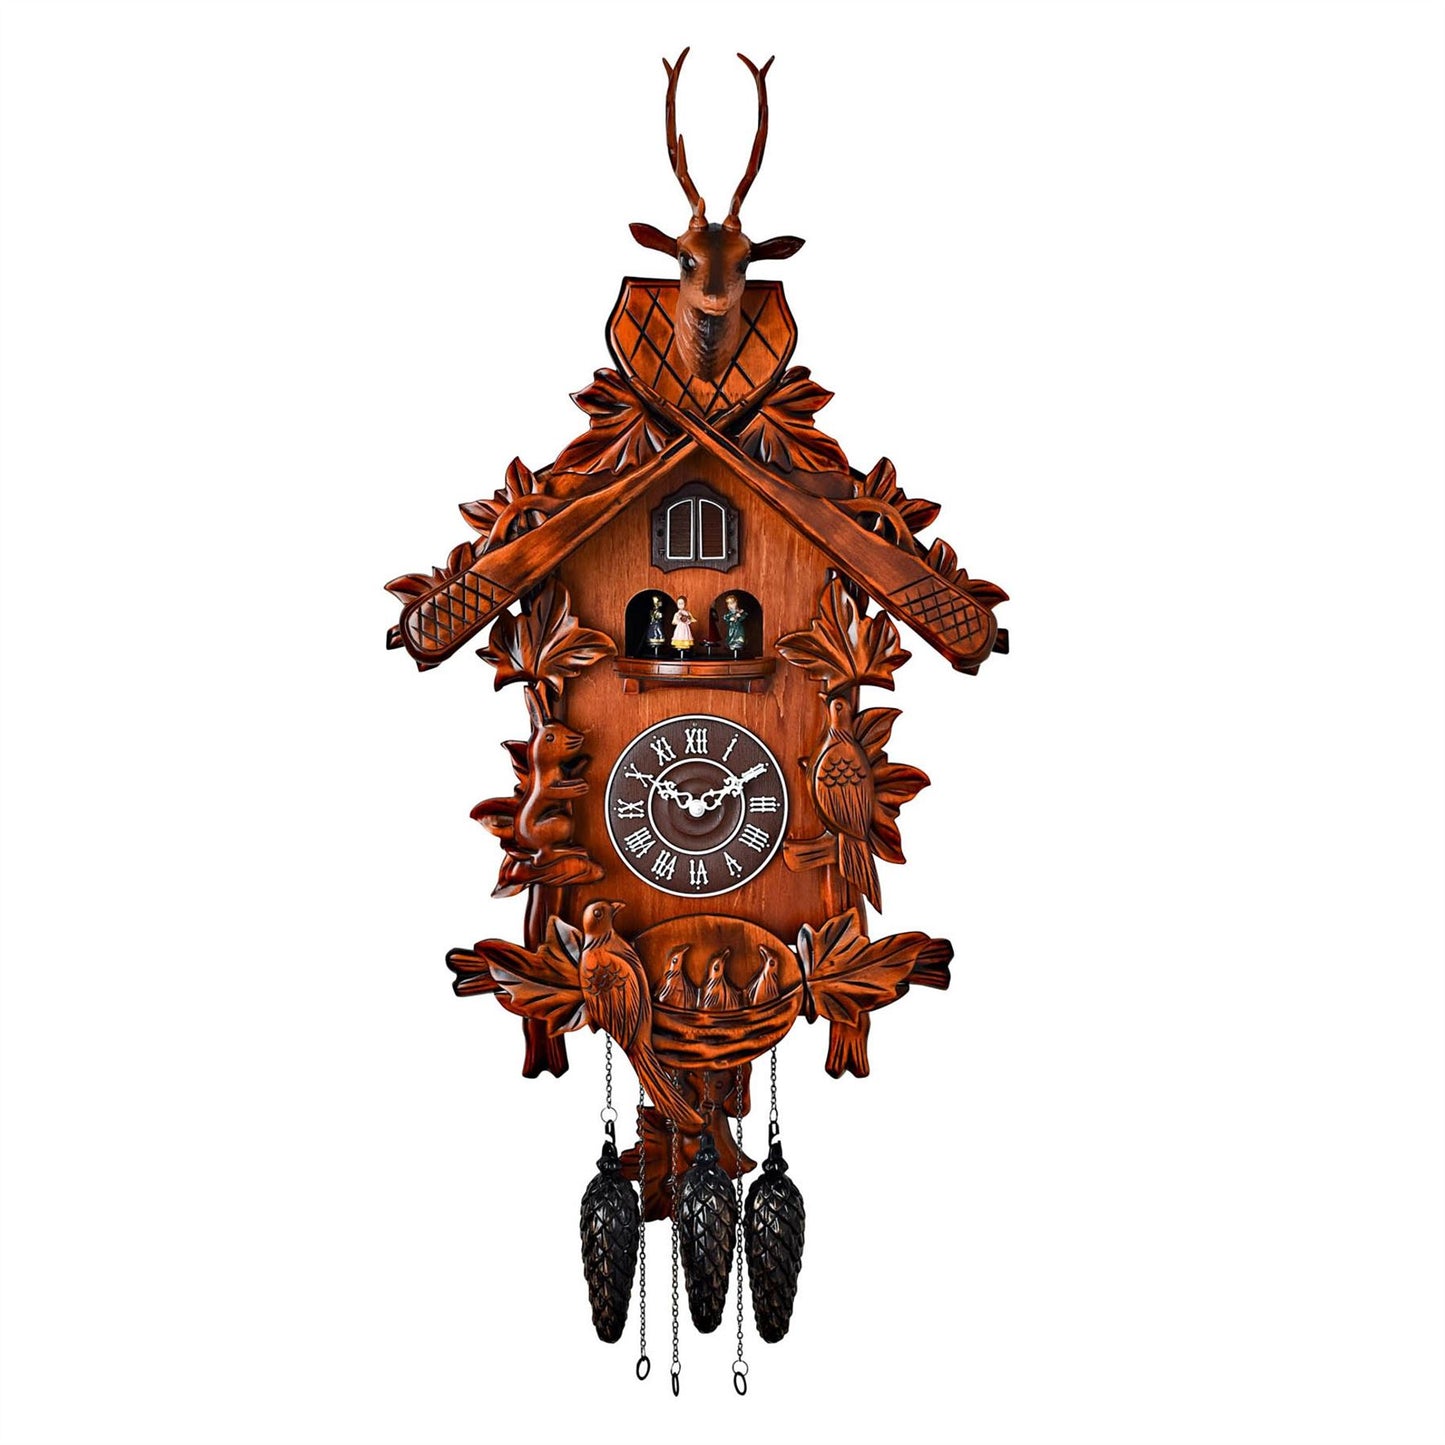 Qtz Cuckoo Clock - Lrg Wooden with Roundabout - 2 birds/Stag